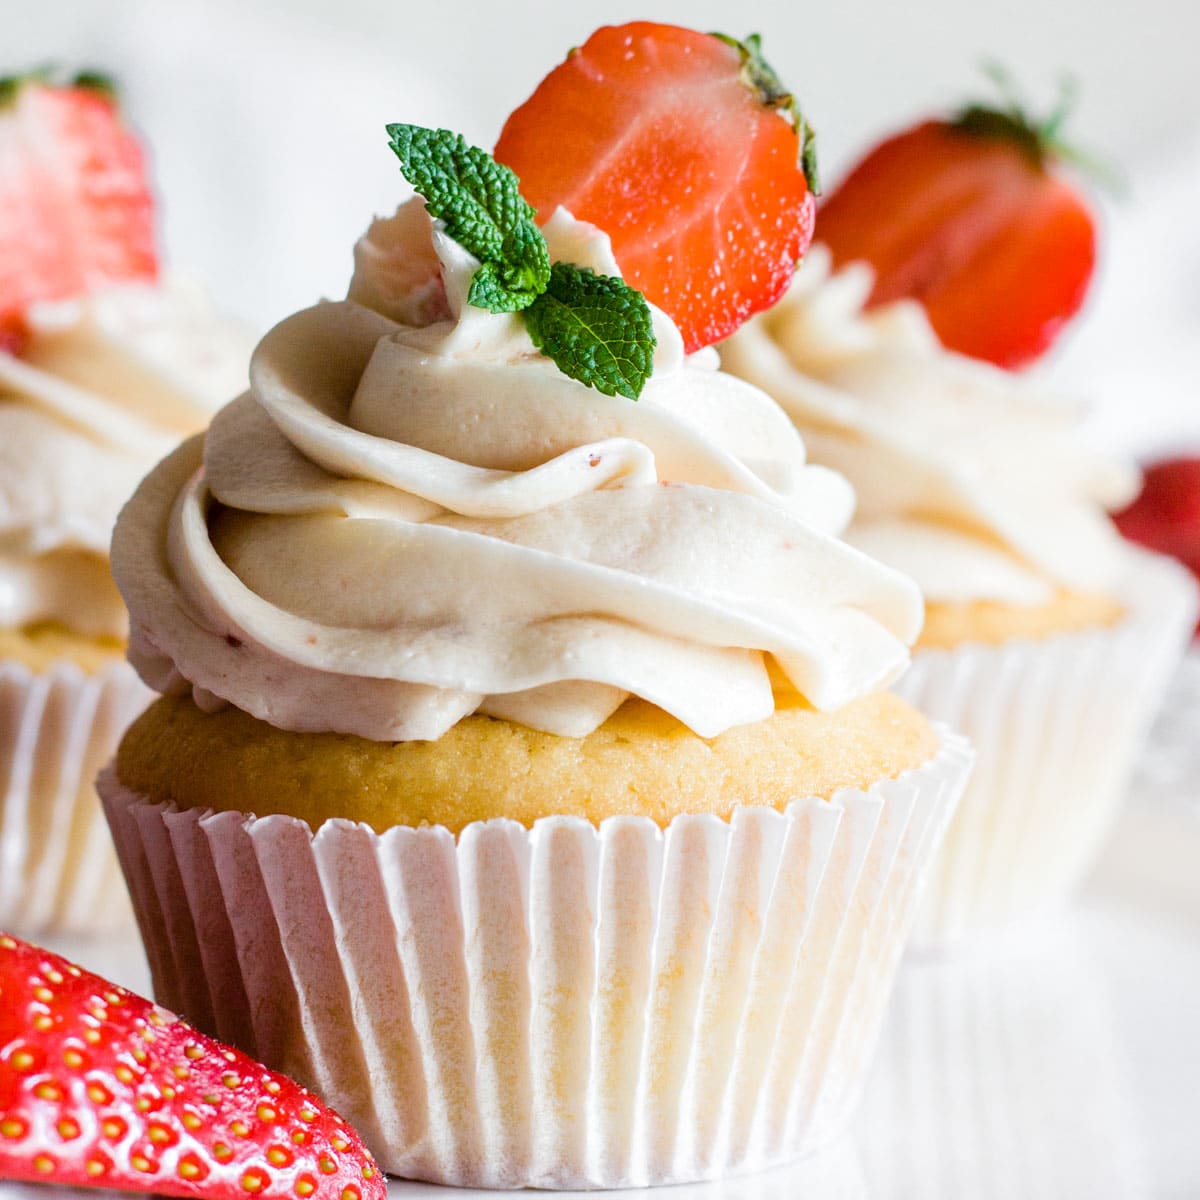 strawberry filled cupcakes on a white plate